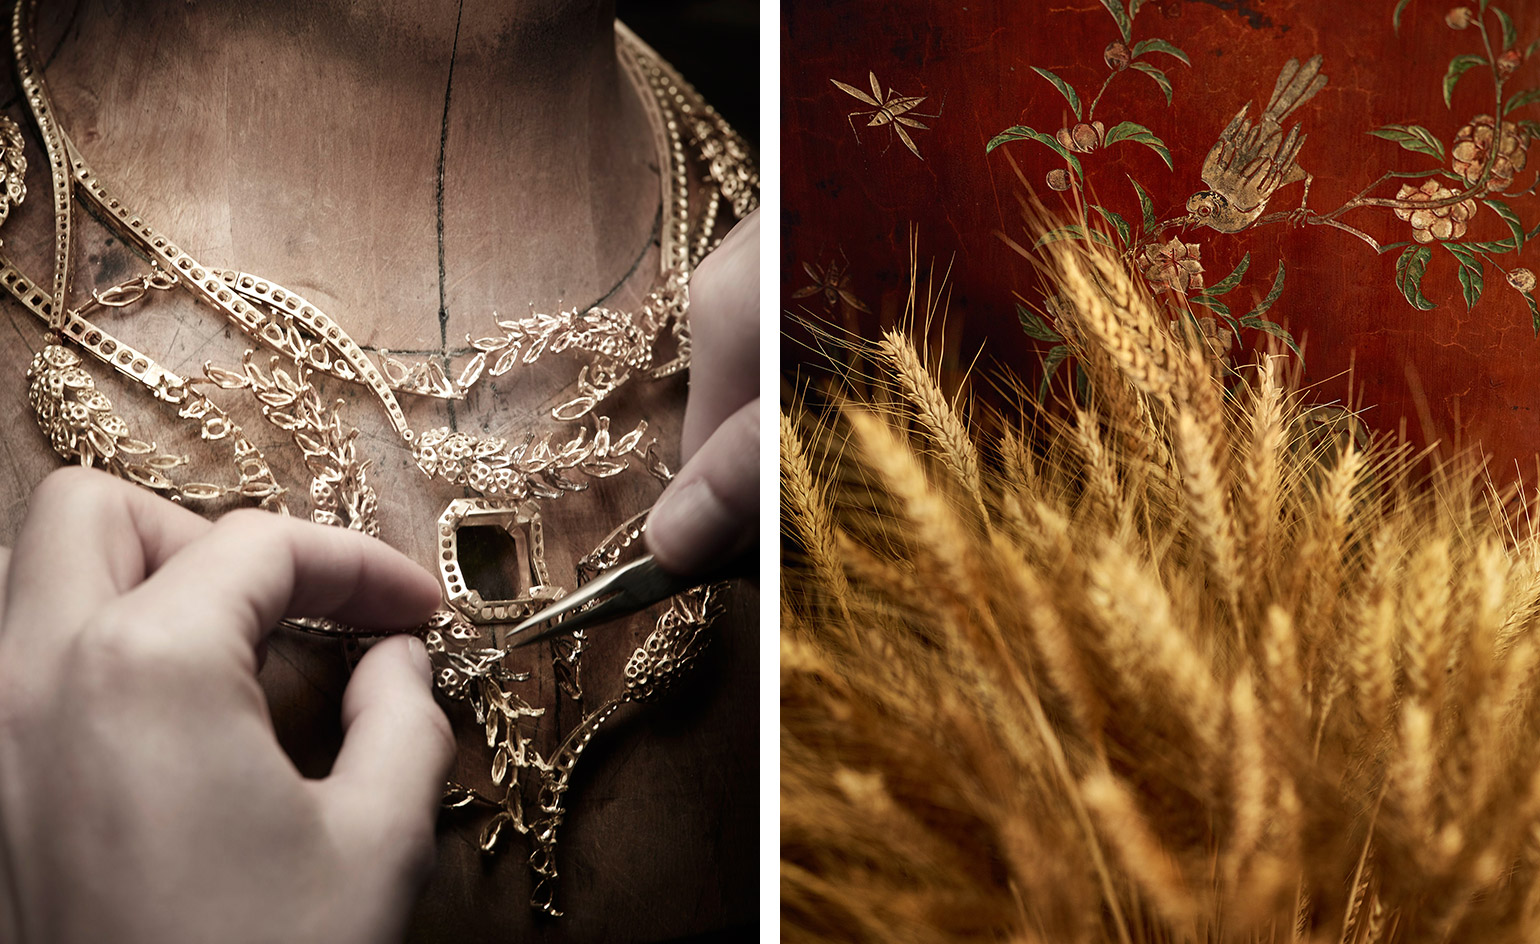 Chanel's wheat-inspired jewellery collection arrives in London